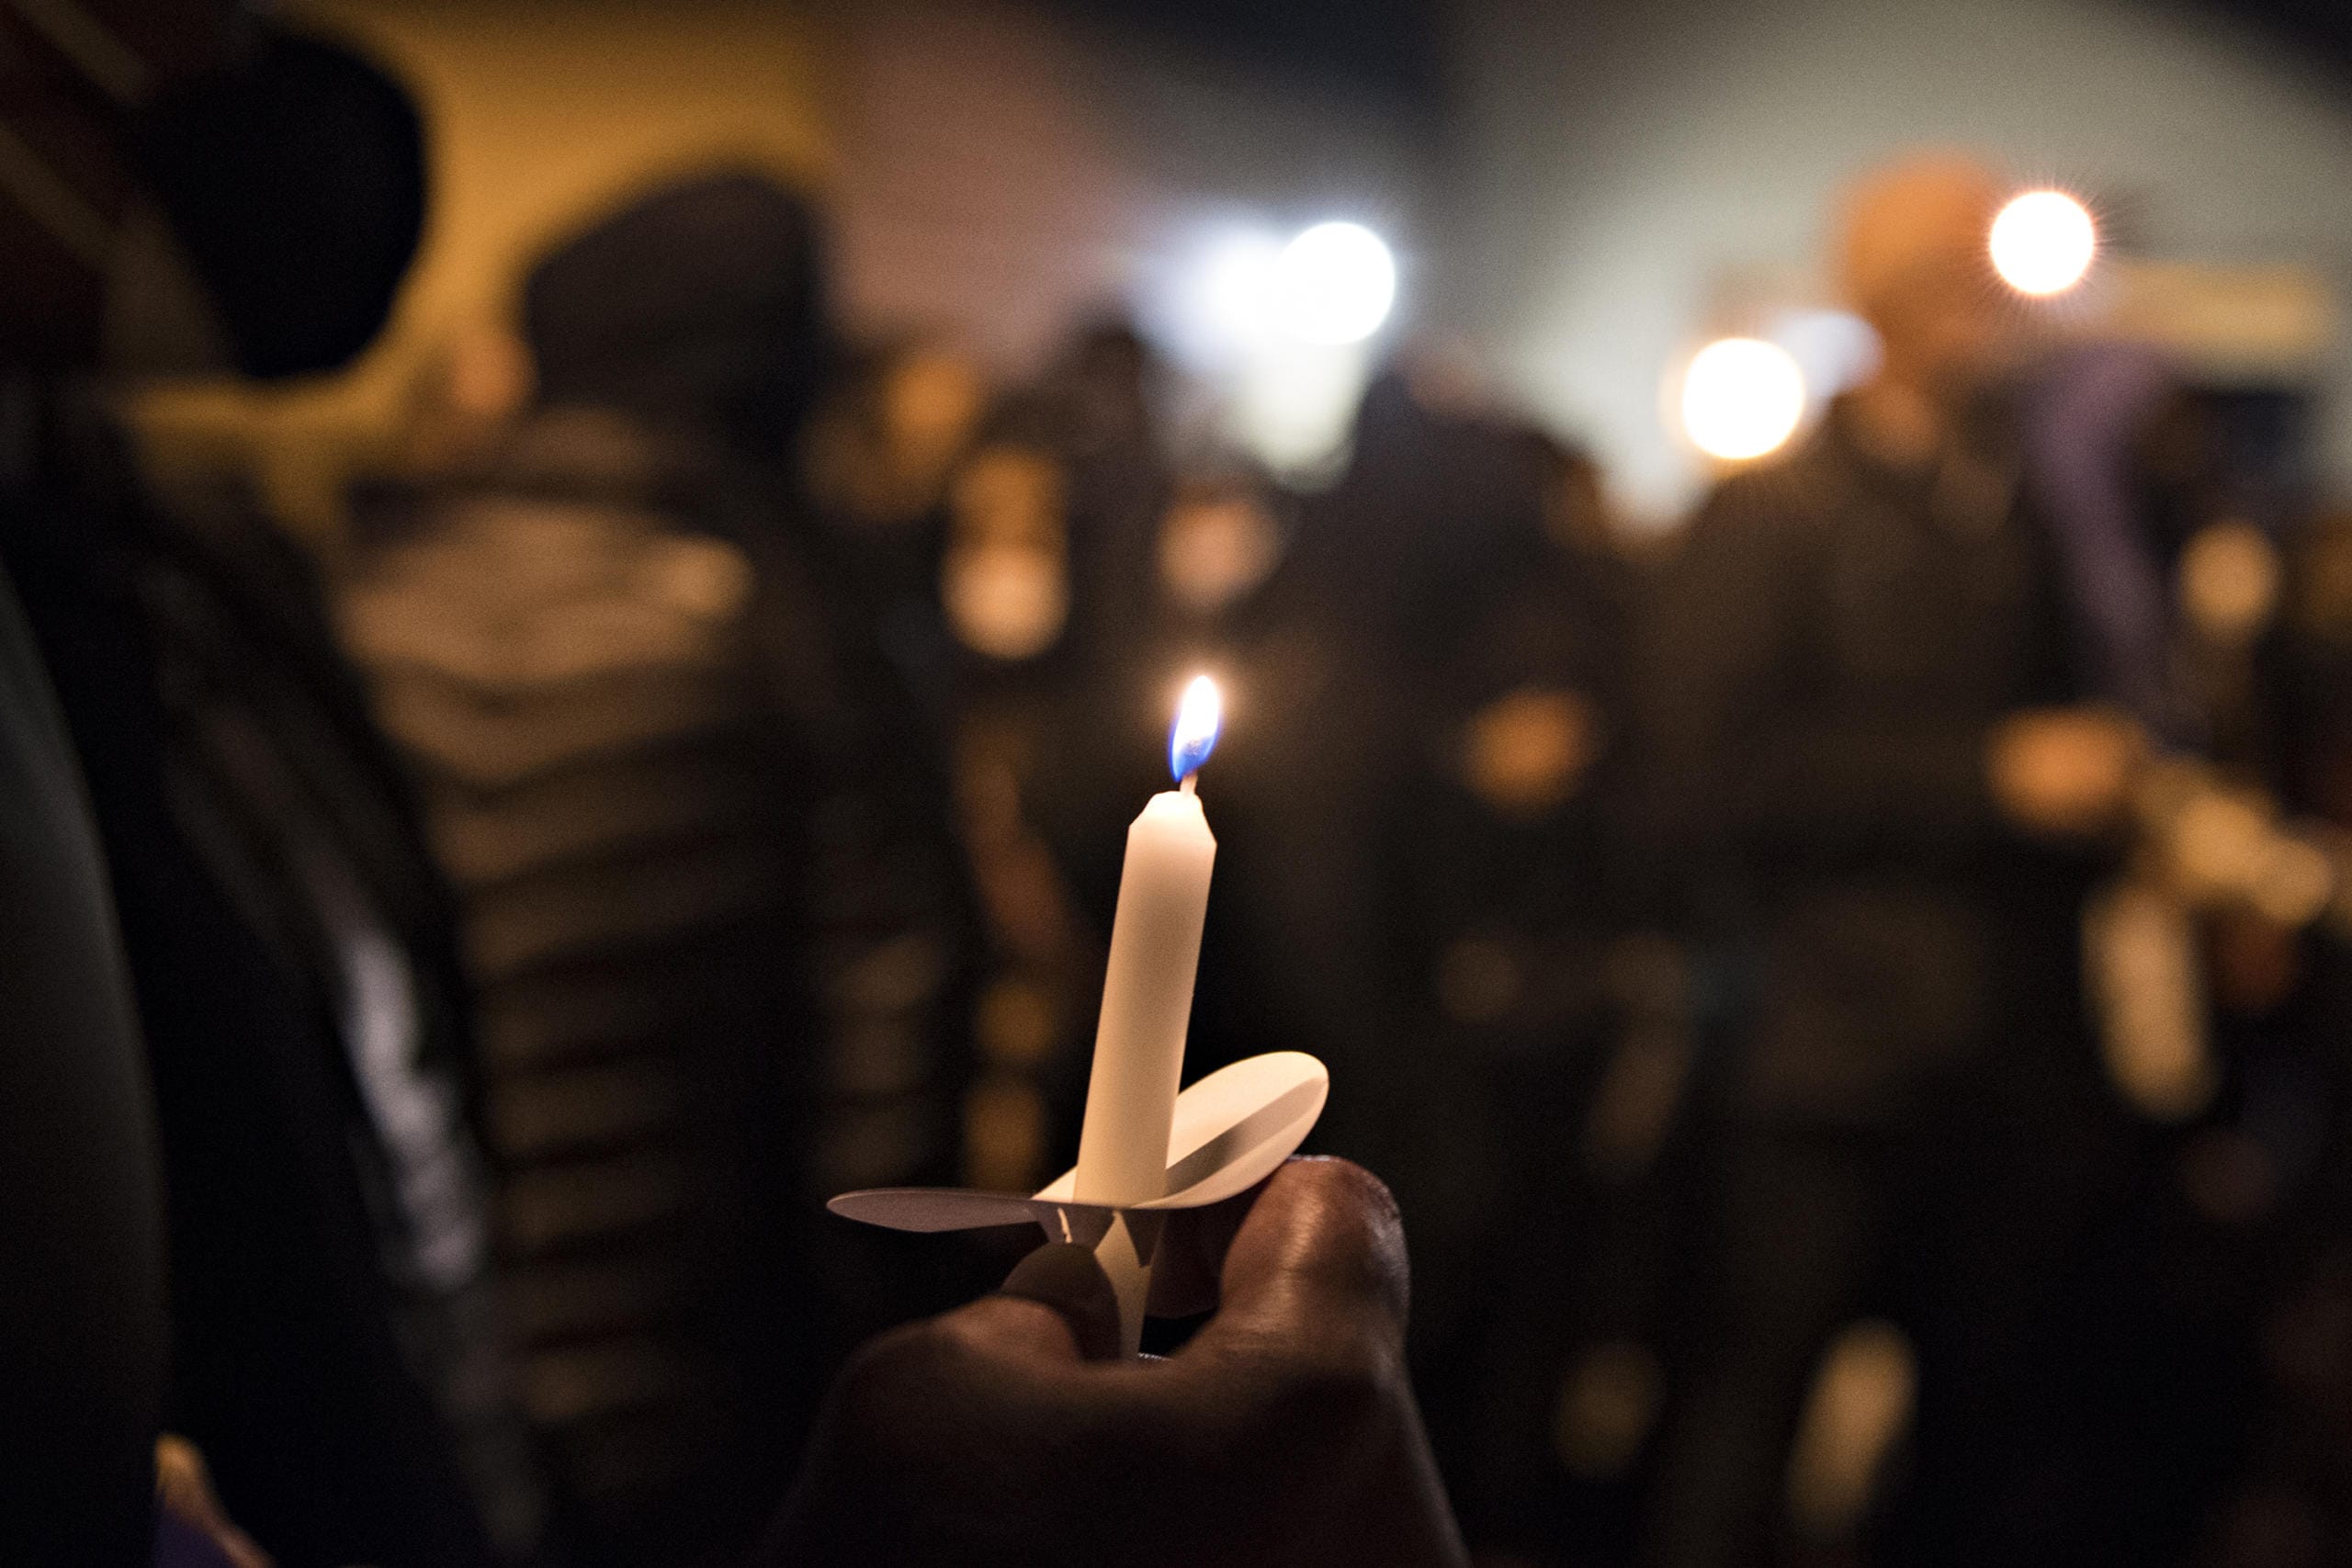 Mourners pay their respects as Kevin Peterson Jr., a 21-year-old Black Camas man, is remembered with a candlelight vigil at the Hazel Dell branch of U.S. Bank on Friday night, Oct. 30, 2020.